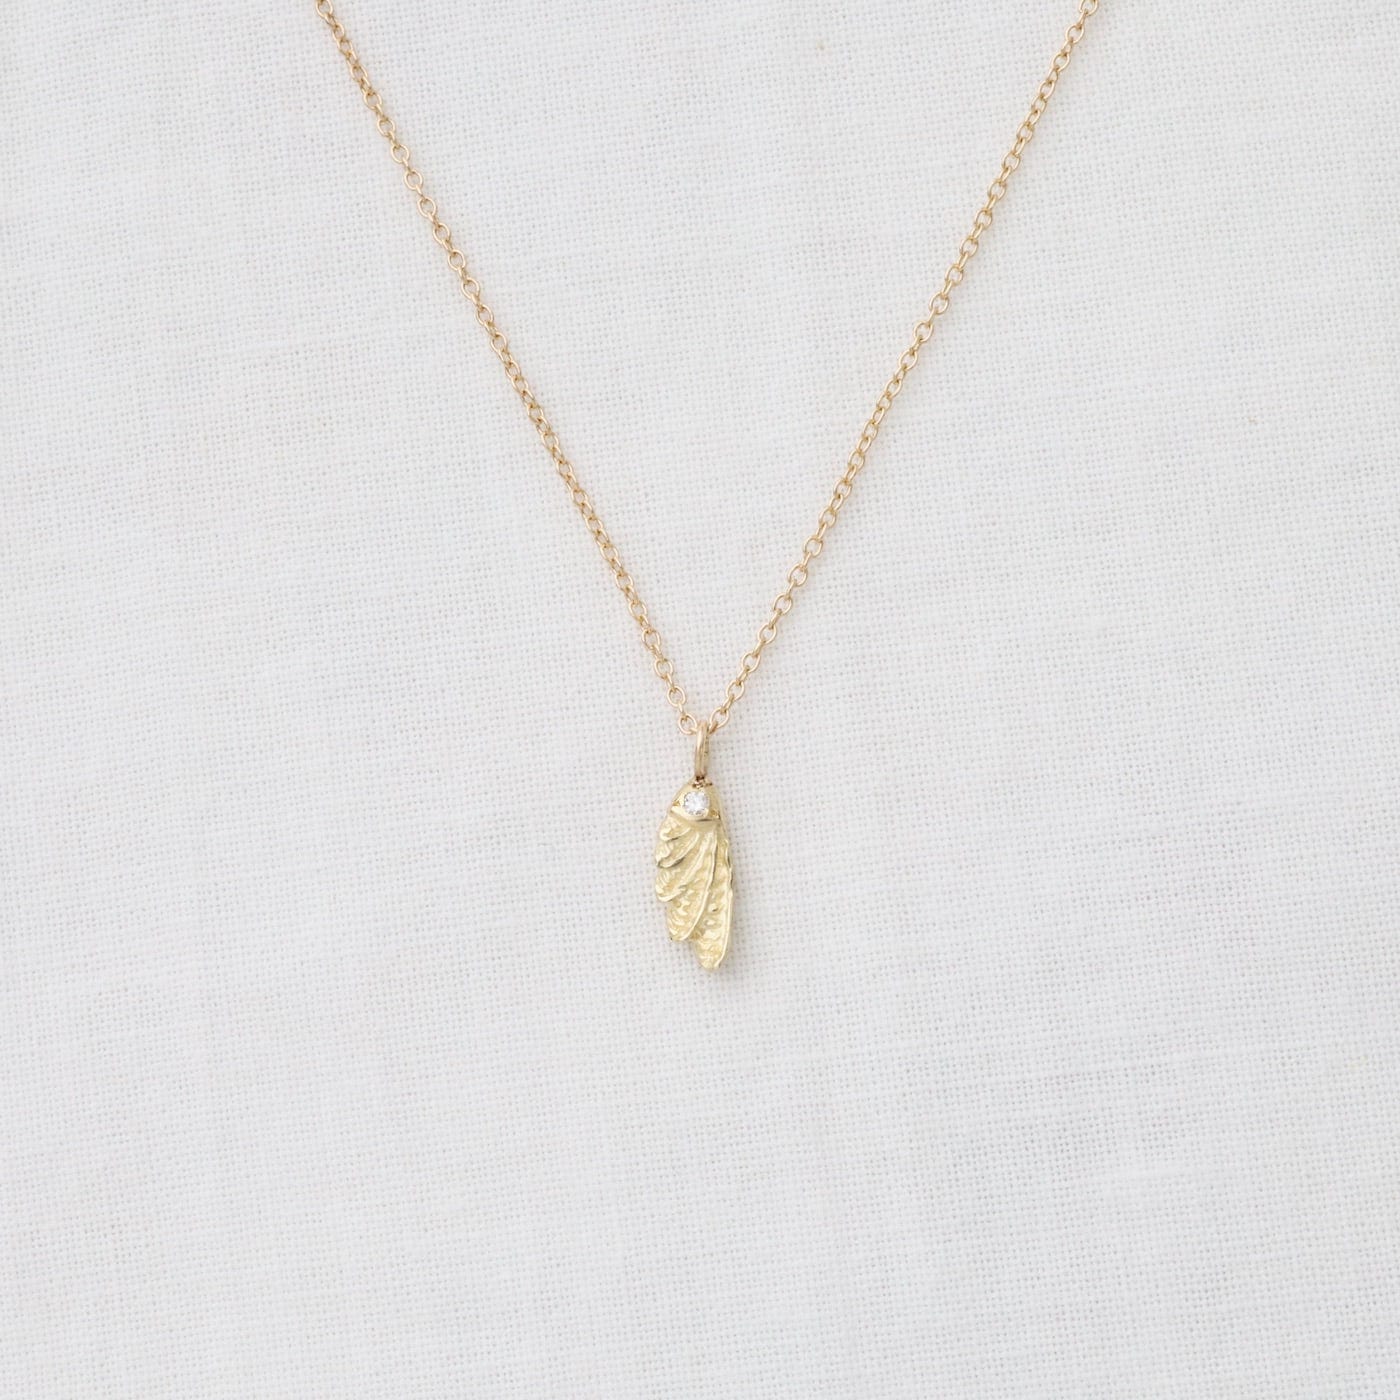 NKL-14K Small Angel Wing Diamond Necklace